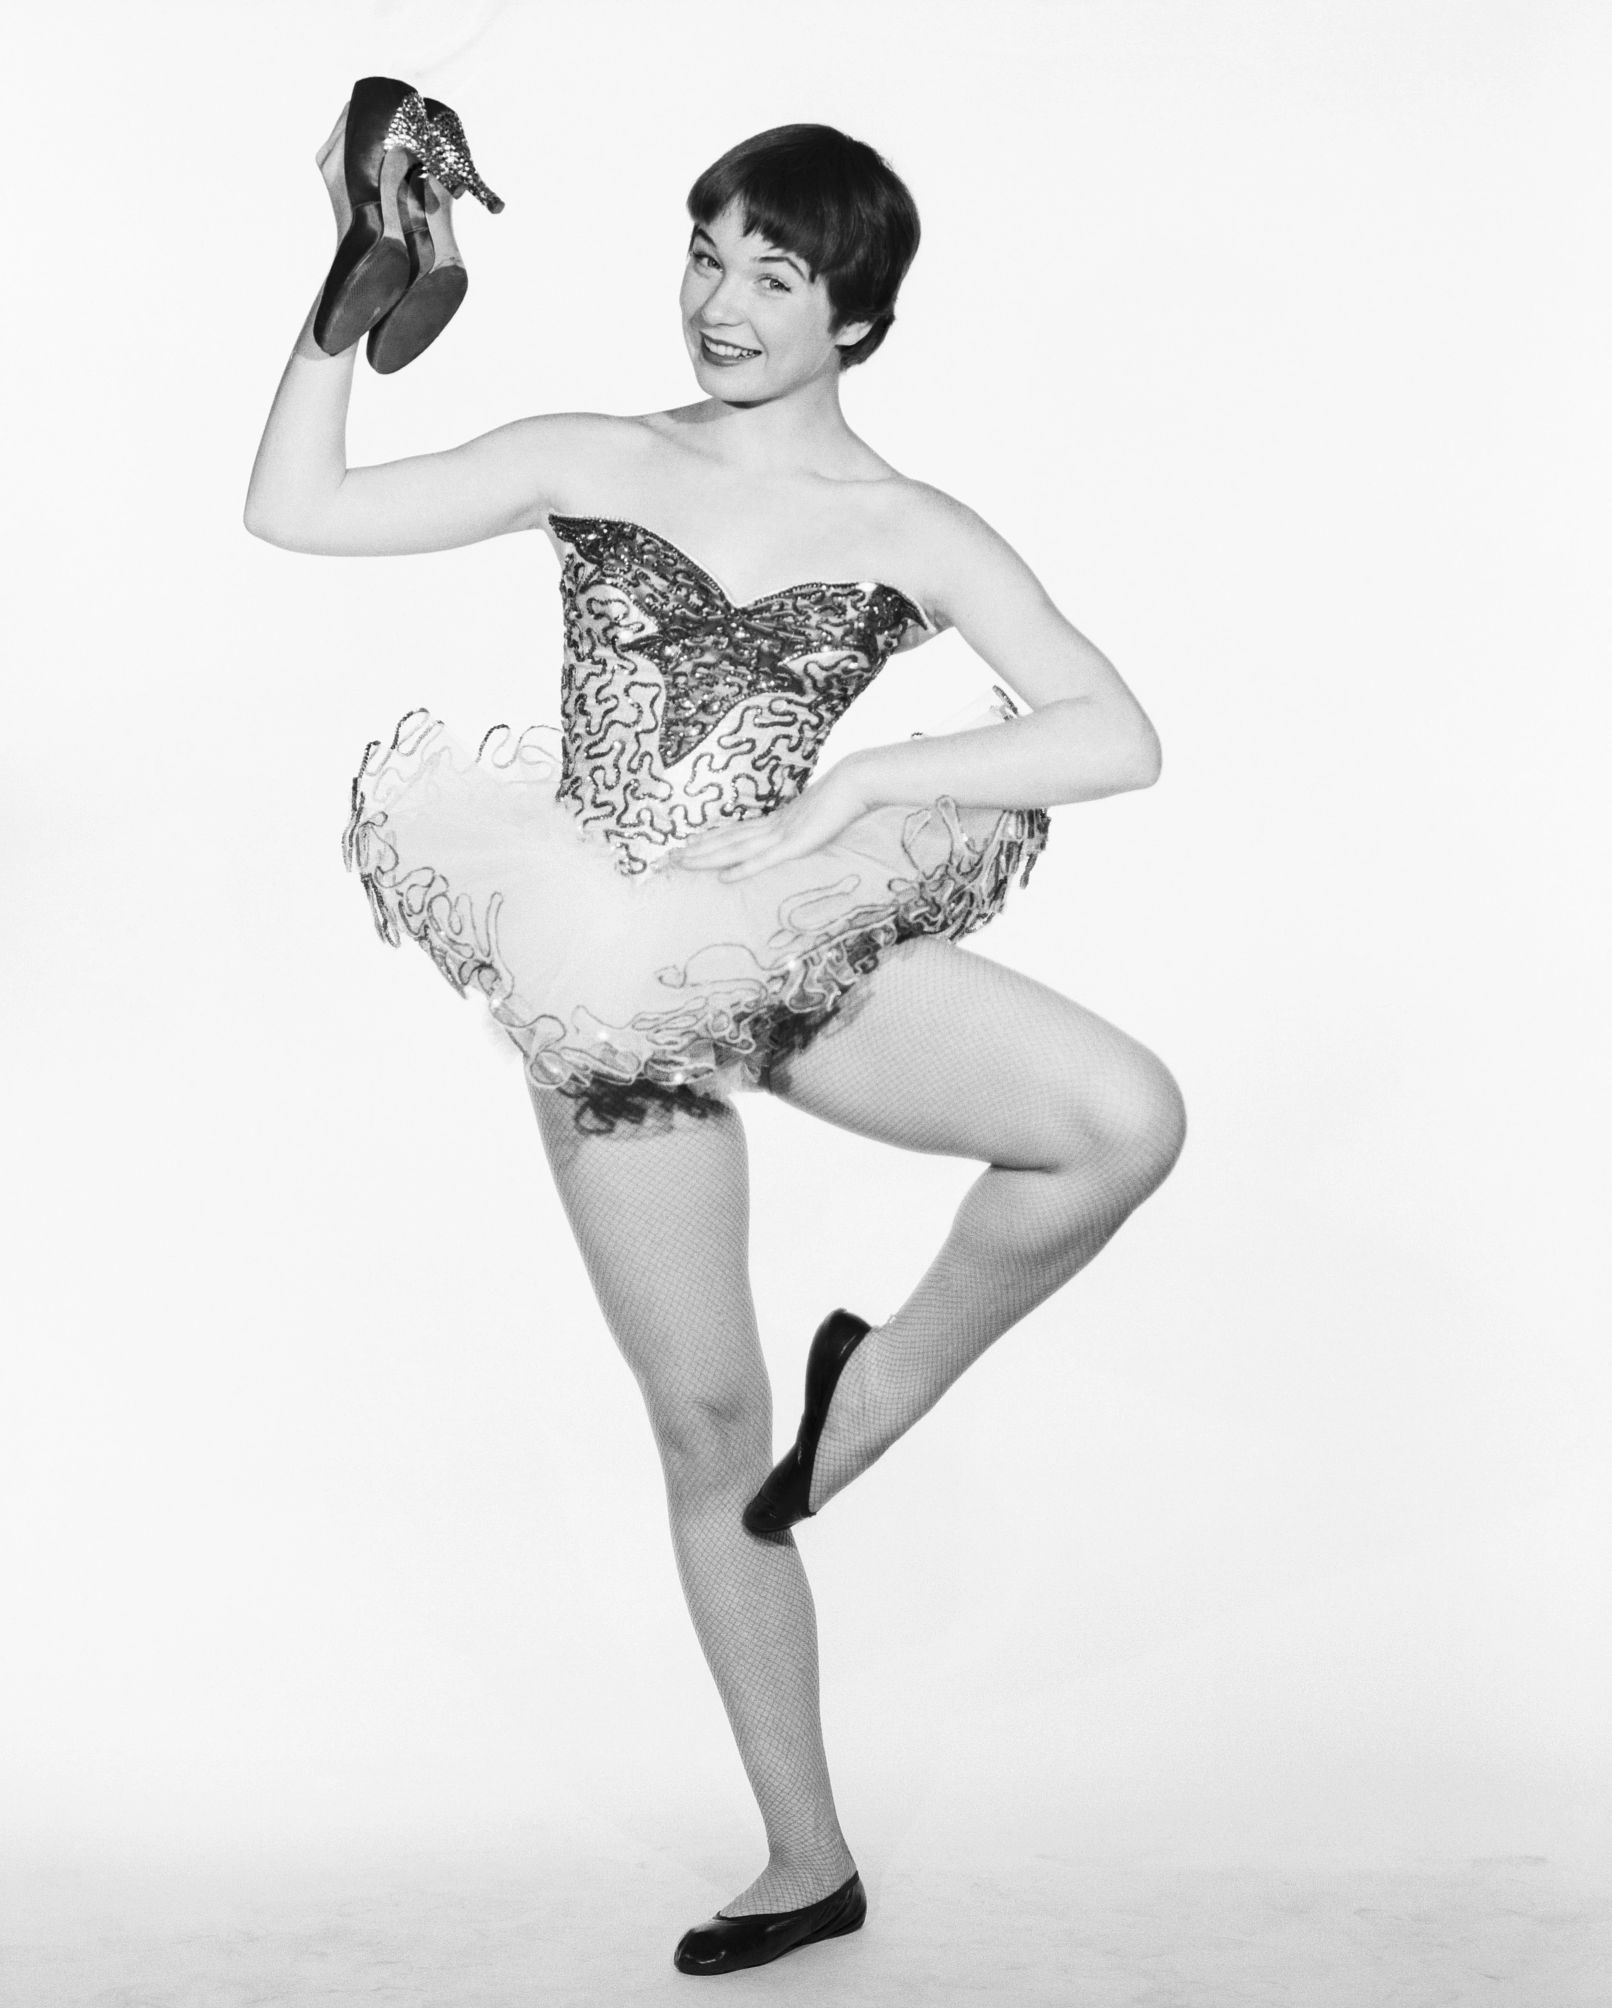 Shirley MacLaine holding her shoes while in a ballet costume